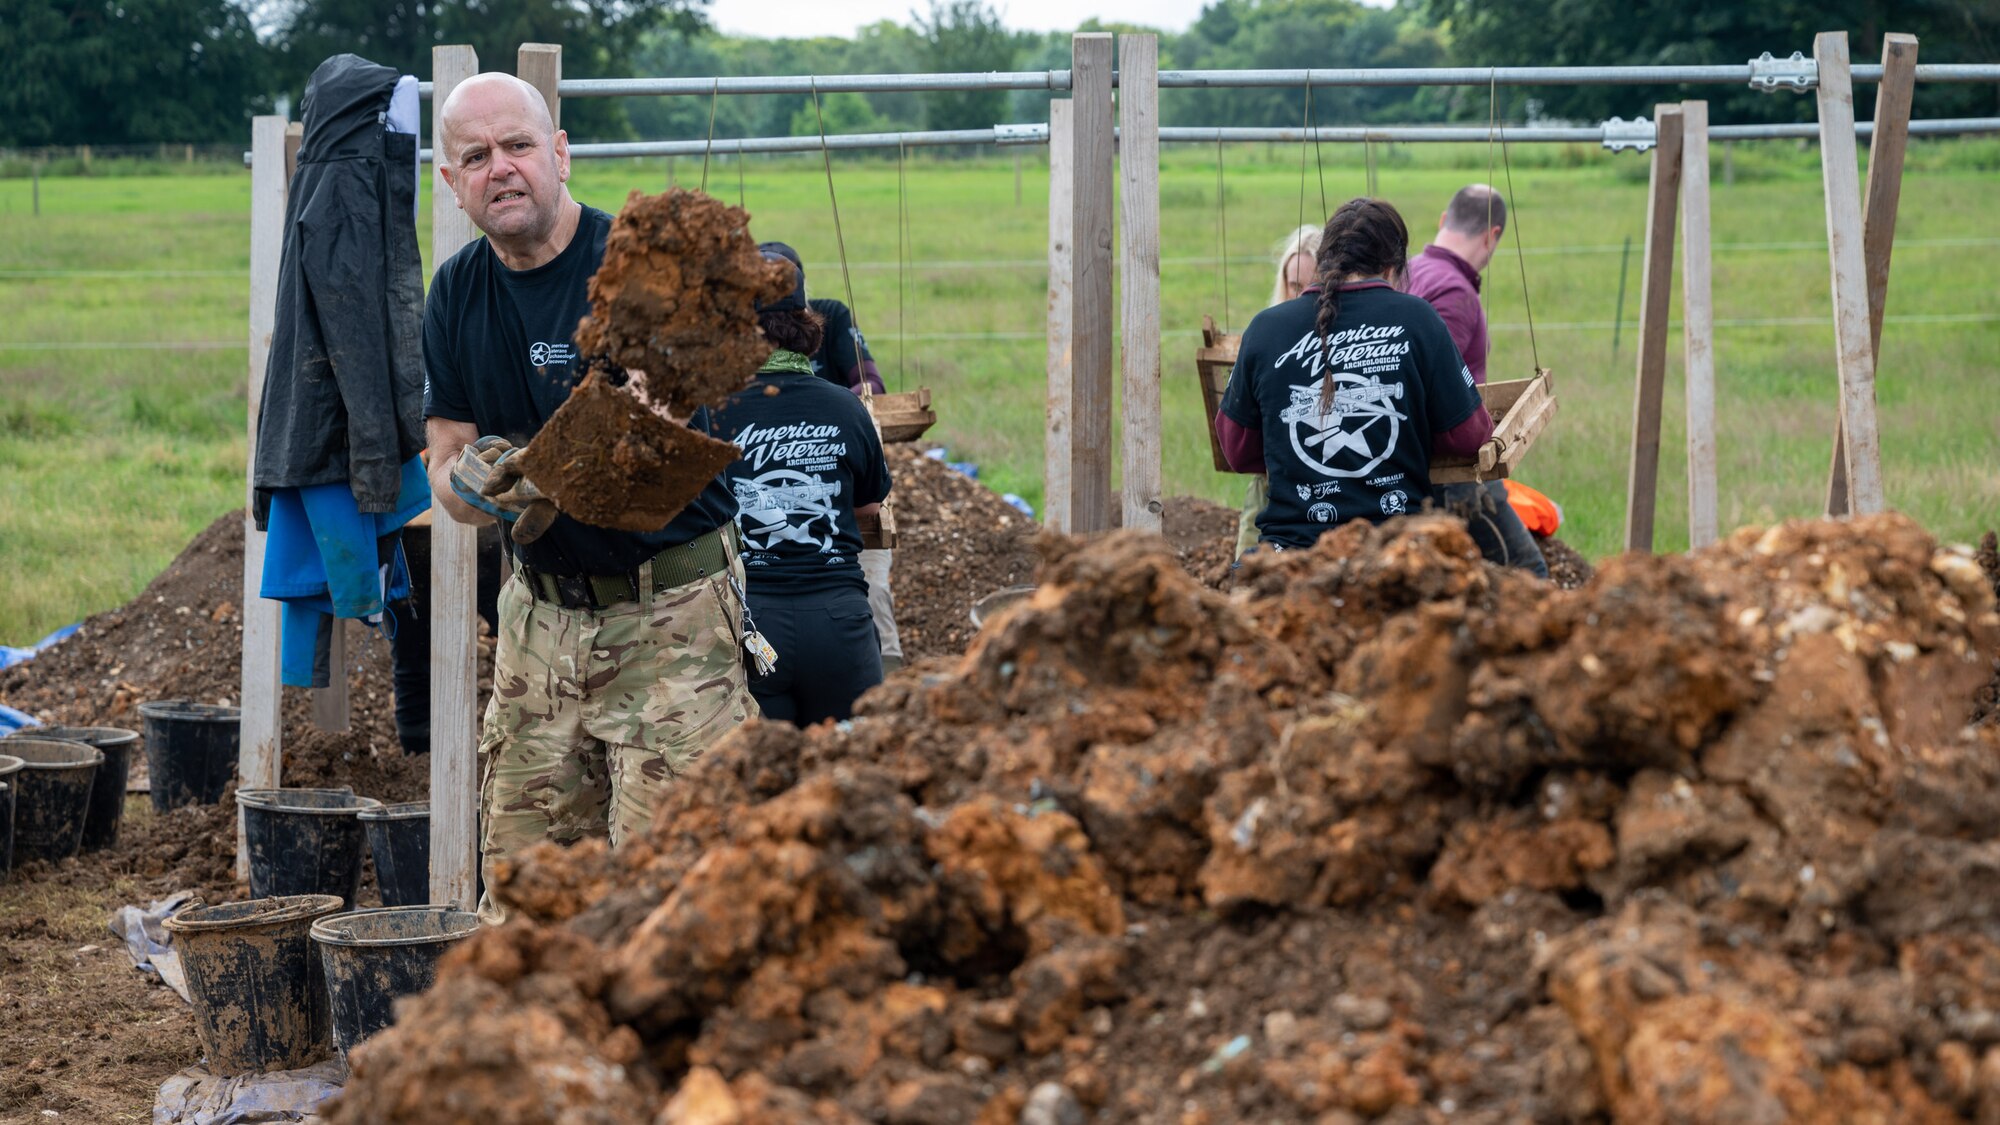 Julian Pitt, a British Navy veteran and volunteer with the American Veterans Archeological Recovery group, searches for remains of fallen service members during a B-24 Liberator excavation at Park Farm in Arundel, England, July 8, 2021. Seven Airmen from RAF Lakenheath had the opportunity to assist in the excavation and work with the AVAR team to recover the remains of these service members. (U.S. Air Force photo by Senior Airman Koby I. Saunders)